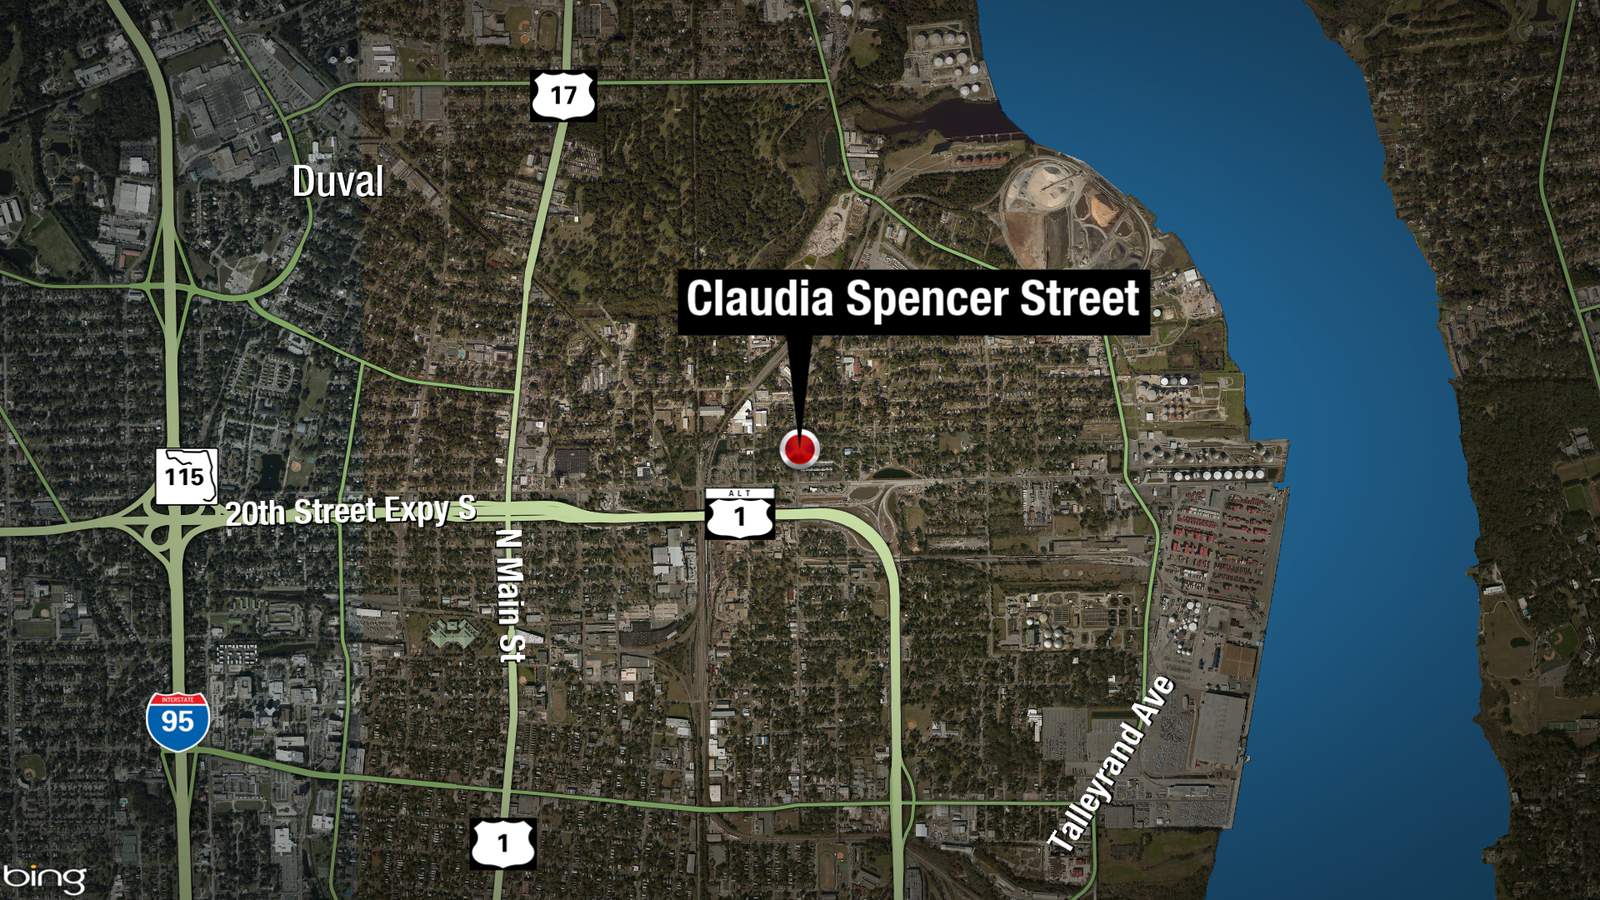 Man dies after shooting on Claudia Spencer Street, police say